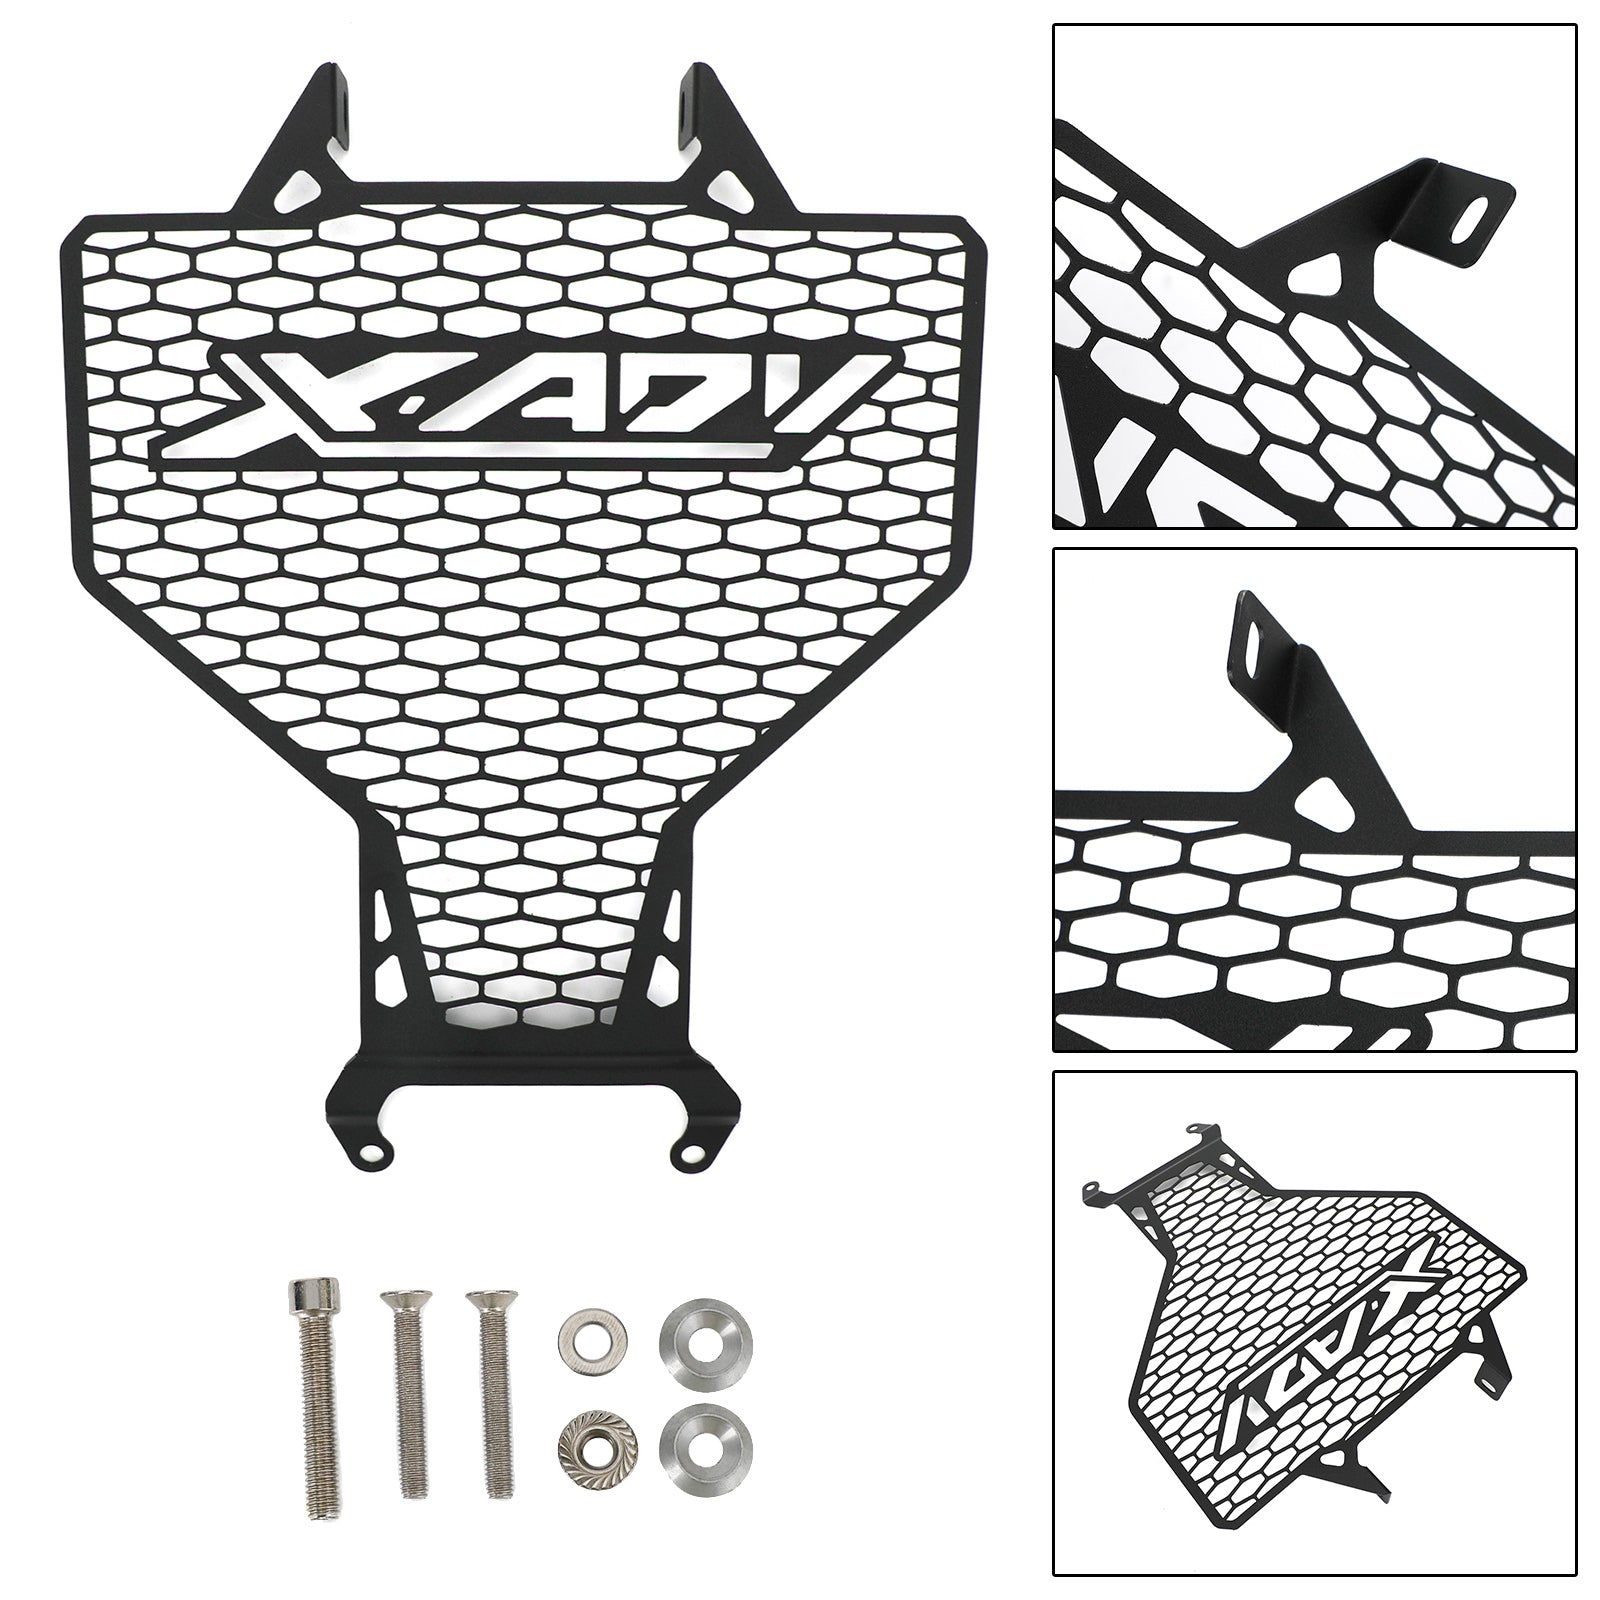 Radiator Guard Cover Protector Stainless Steel Black For Honda X-Adv 750 21+